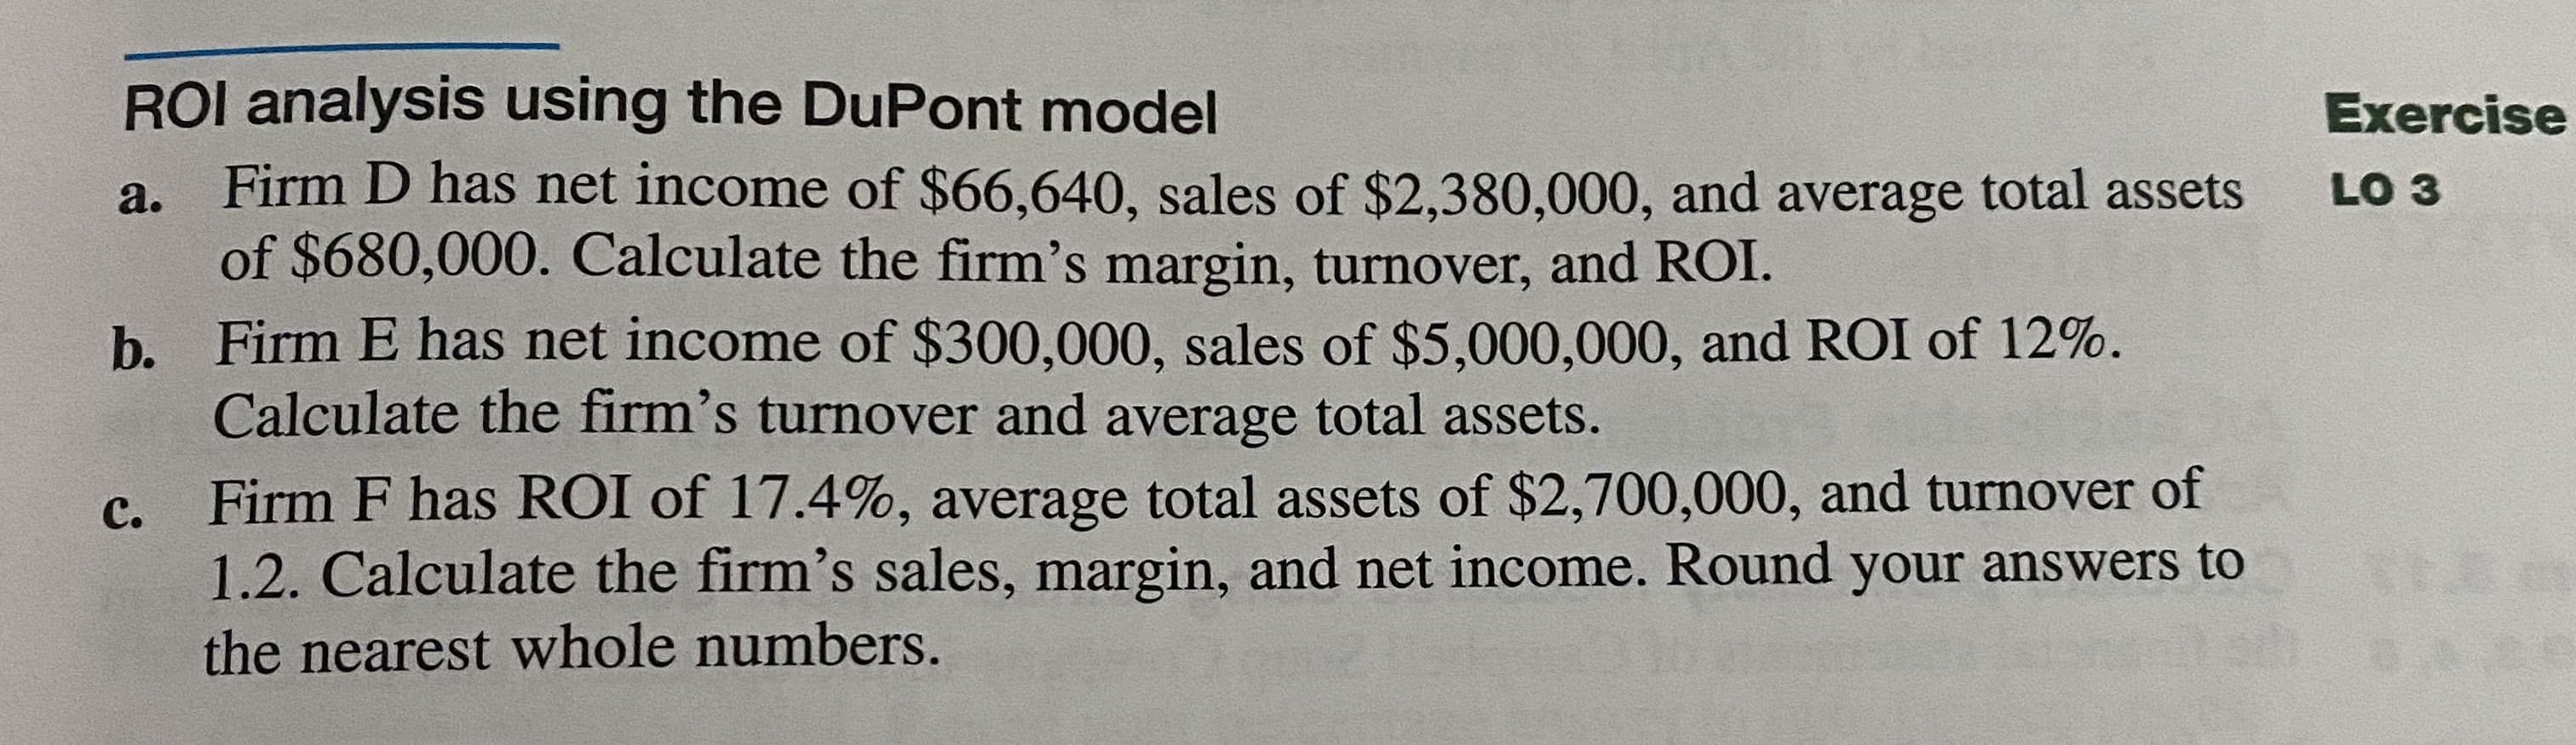 ROI analysis using the DuPont model
Firm D has net income of $66,640, sales of $2,380,000, and average total assets
of $680,000. Calculate the firm's margin, turnover, and ROI.
a.
b. Firm E has net income of $300,000, sales of $5,000,000, and ROI of 12%.
Calculate the firm's turnover and average total assets.
с.
Firm F has ROI of 17.4%, average total assets of $2,700,000, and turnover of
1.2. Calculate the firm's sales, margin, and net income. Round your answers to
the nearest whole numbers.
